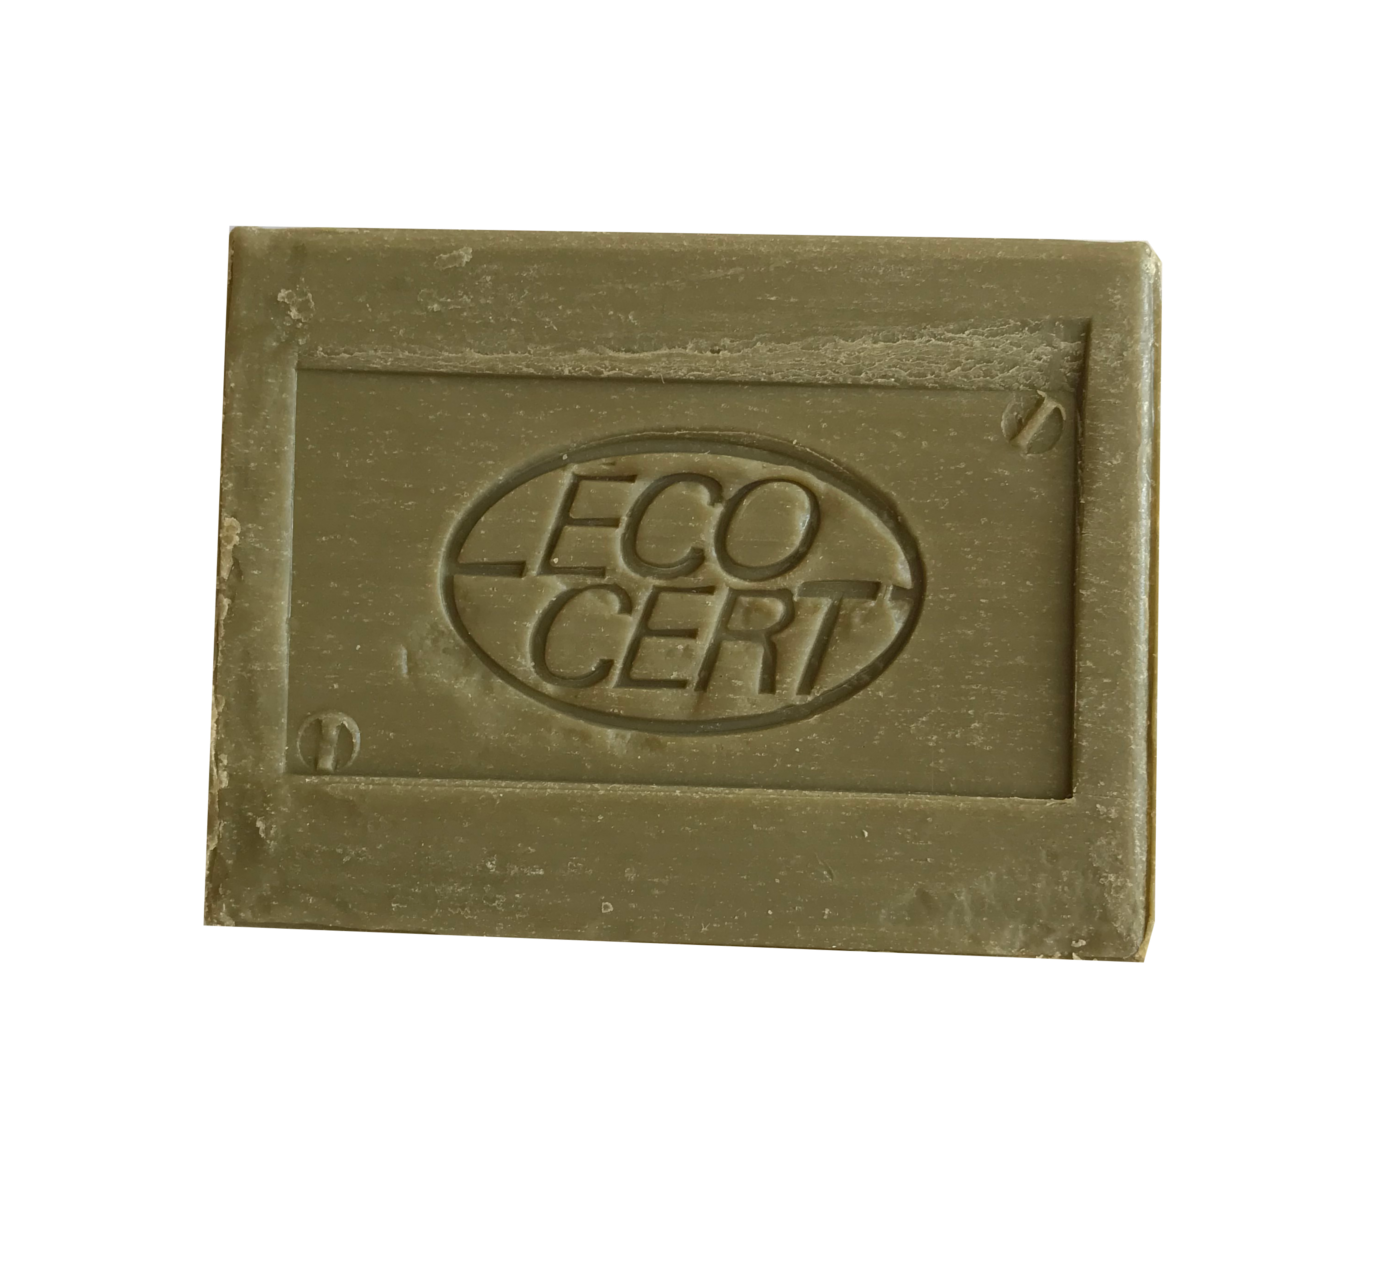 A rectangular bar of olive green soap imprinted with ECOCERT